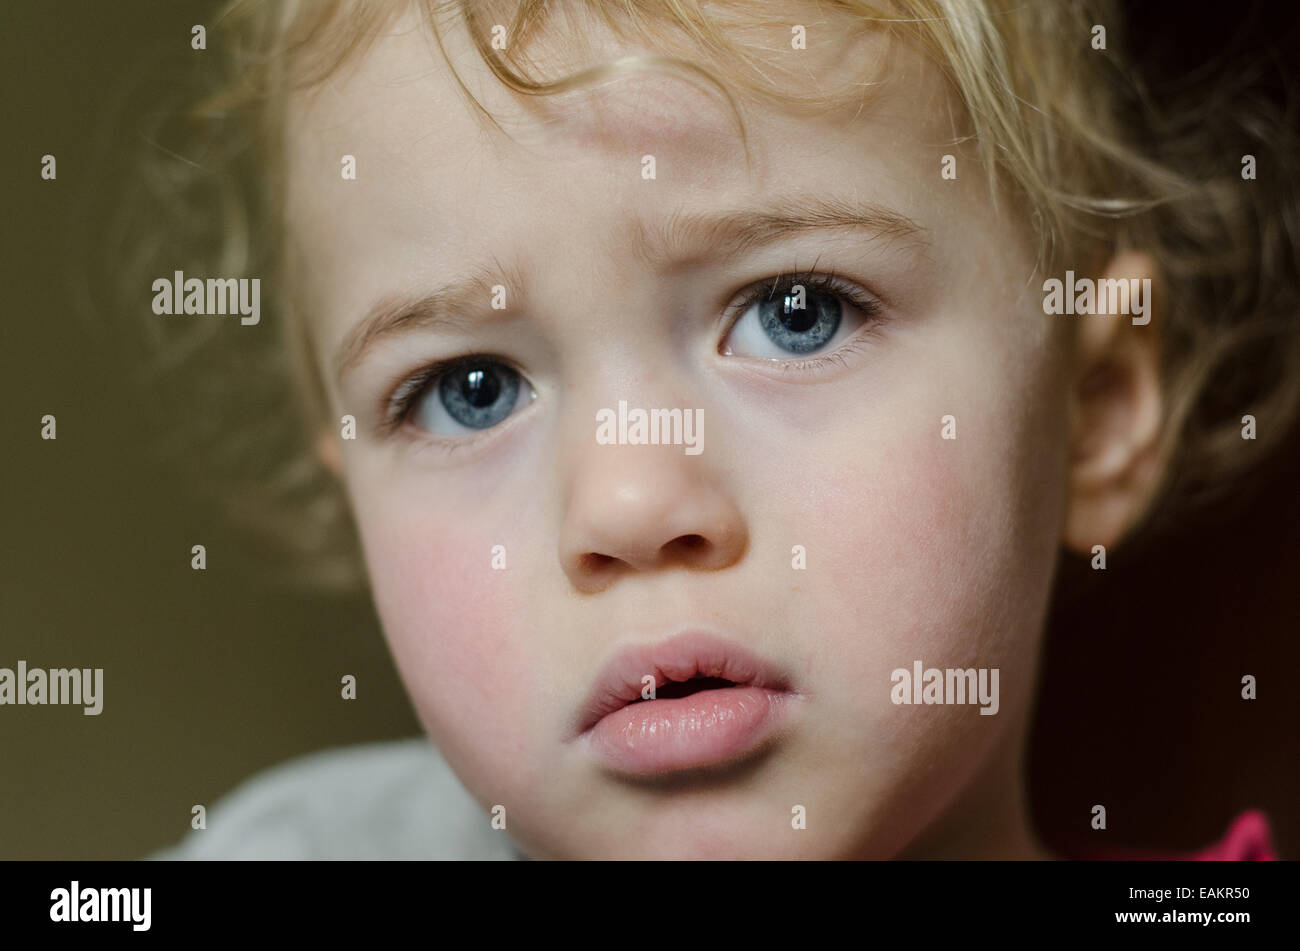 A serious-looking blonde and blue-eyed baby boy (ca. 20 months old). Stock Photo